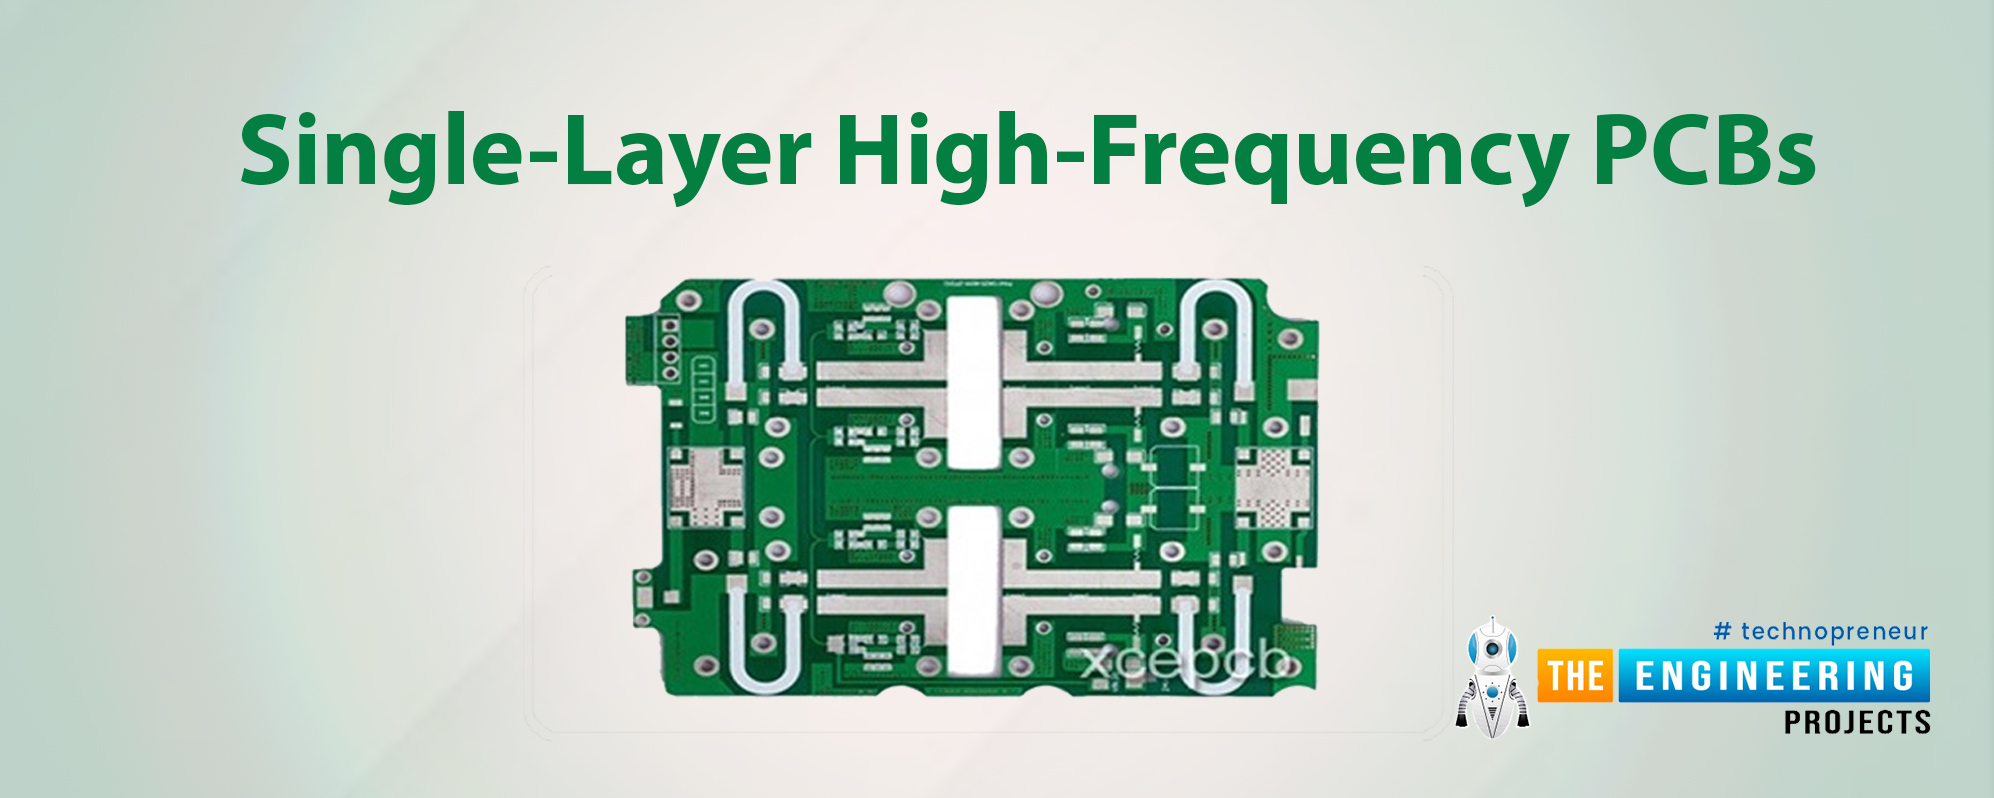 Single-layer PCB, Single-layer Definition, Construction of single layer, Types of singles layer PCB, Single layer high-frequency PCBs